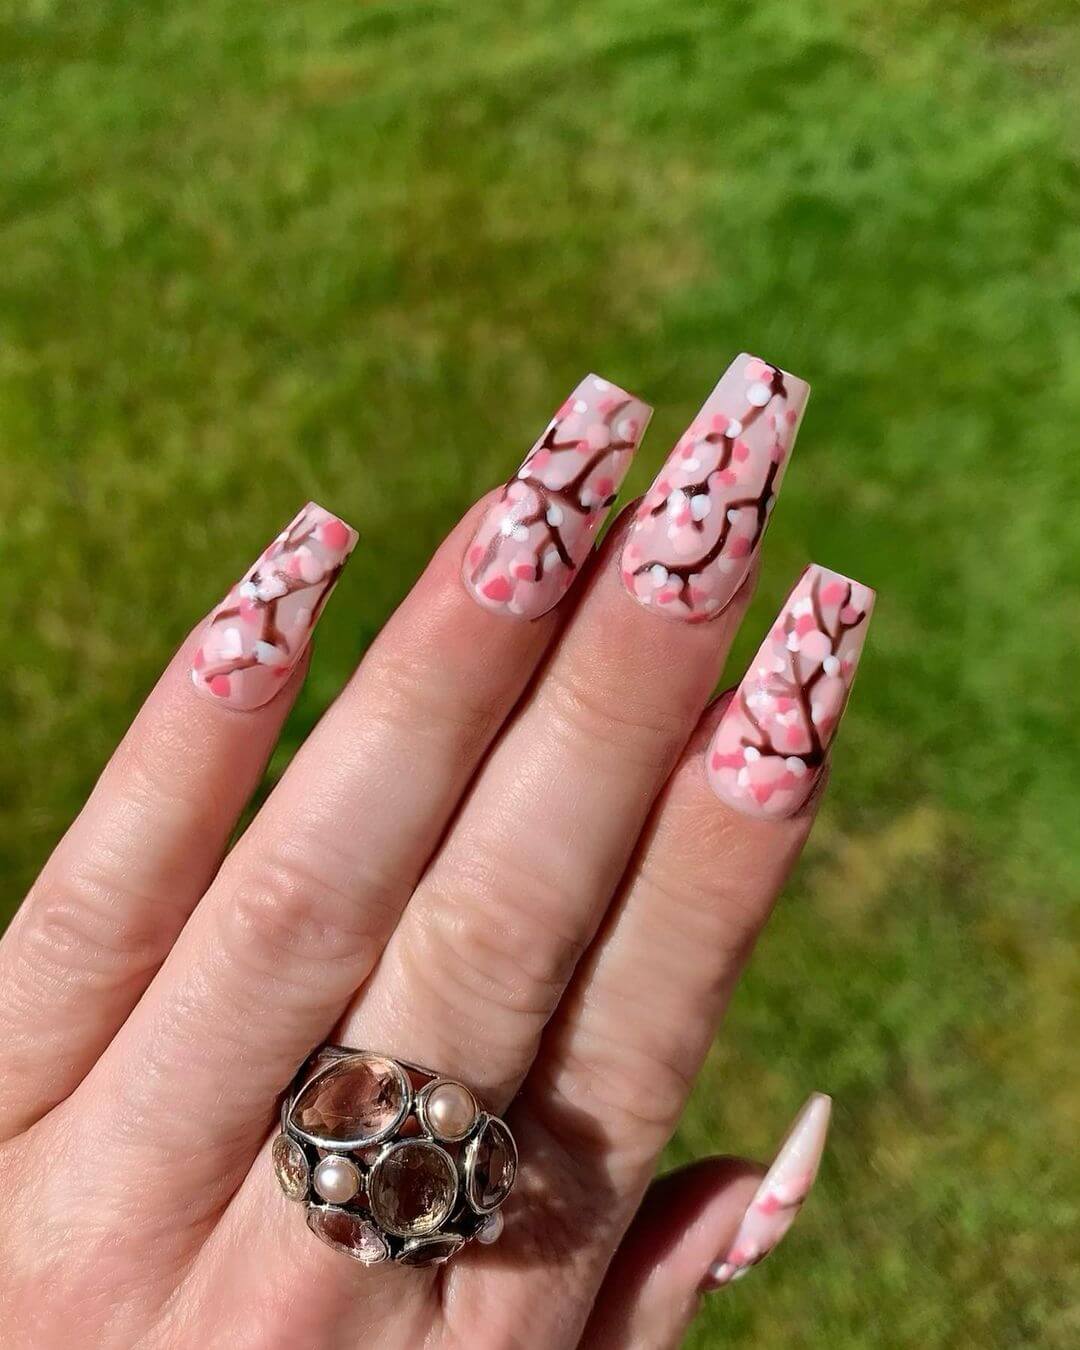 Pink Nail Art Design with Cherry Blossom